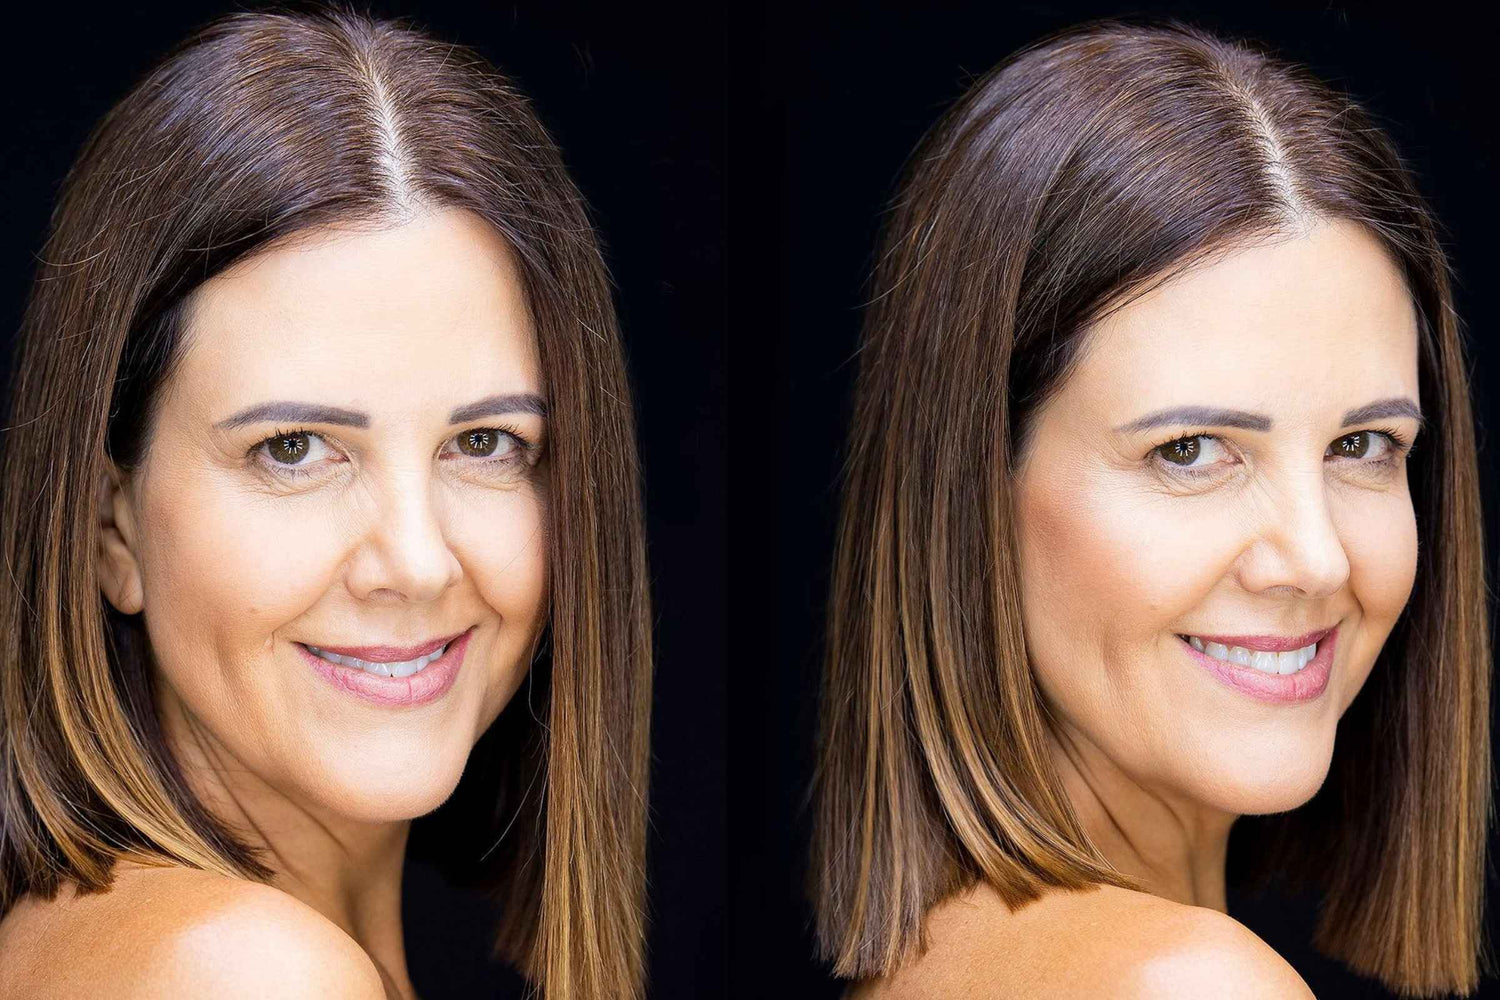 MyEasyGlow model before and after warm glow